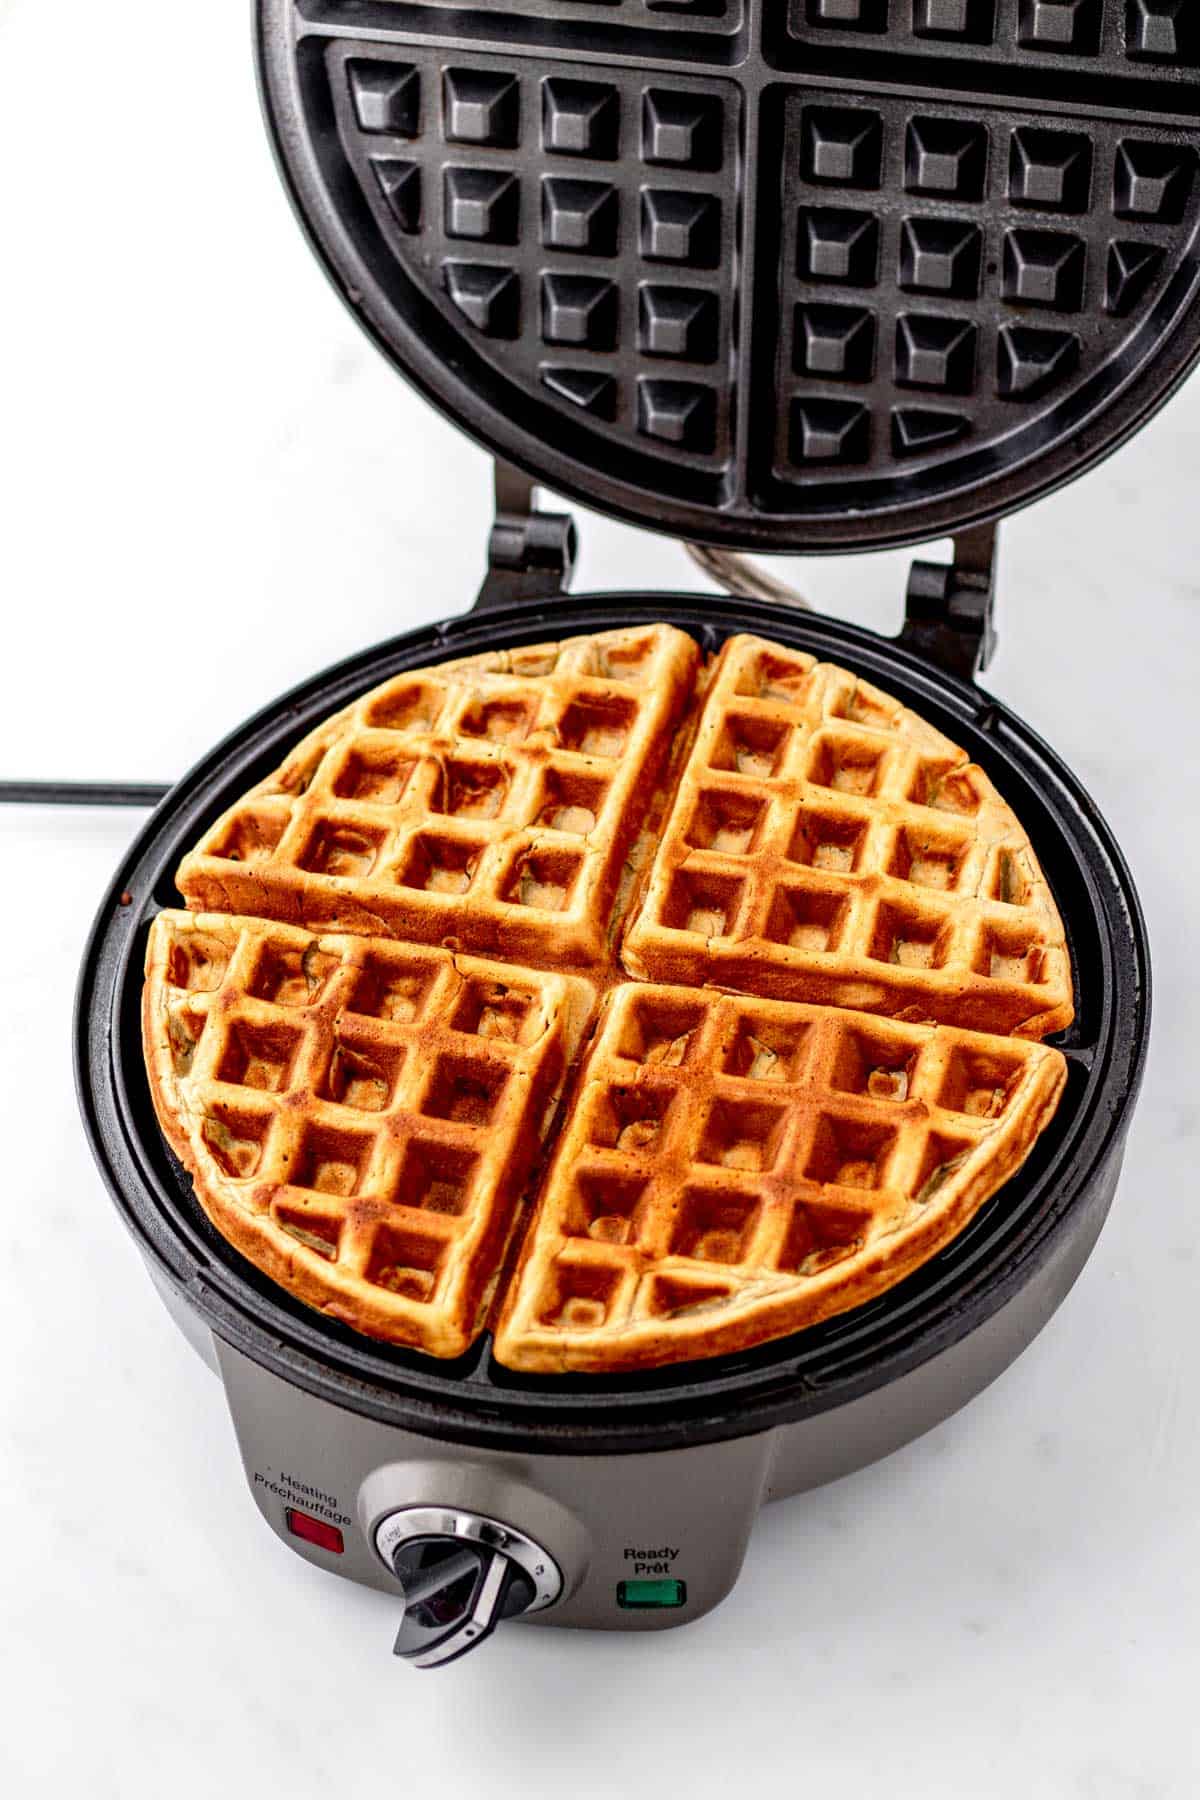 3-ingredient waffles cooking on a waffle iron.